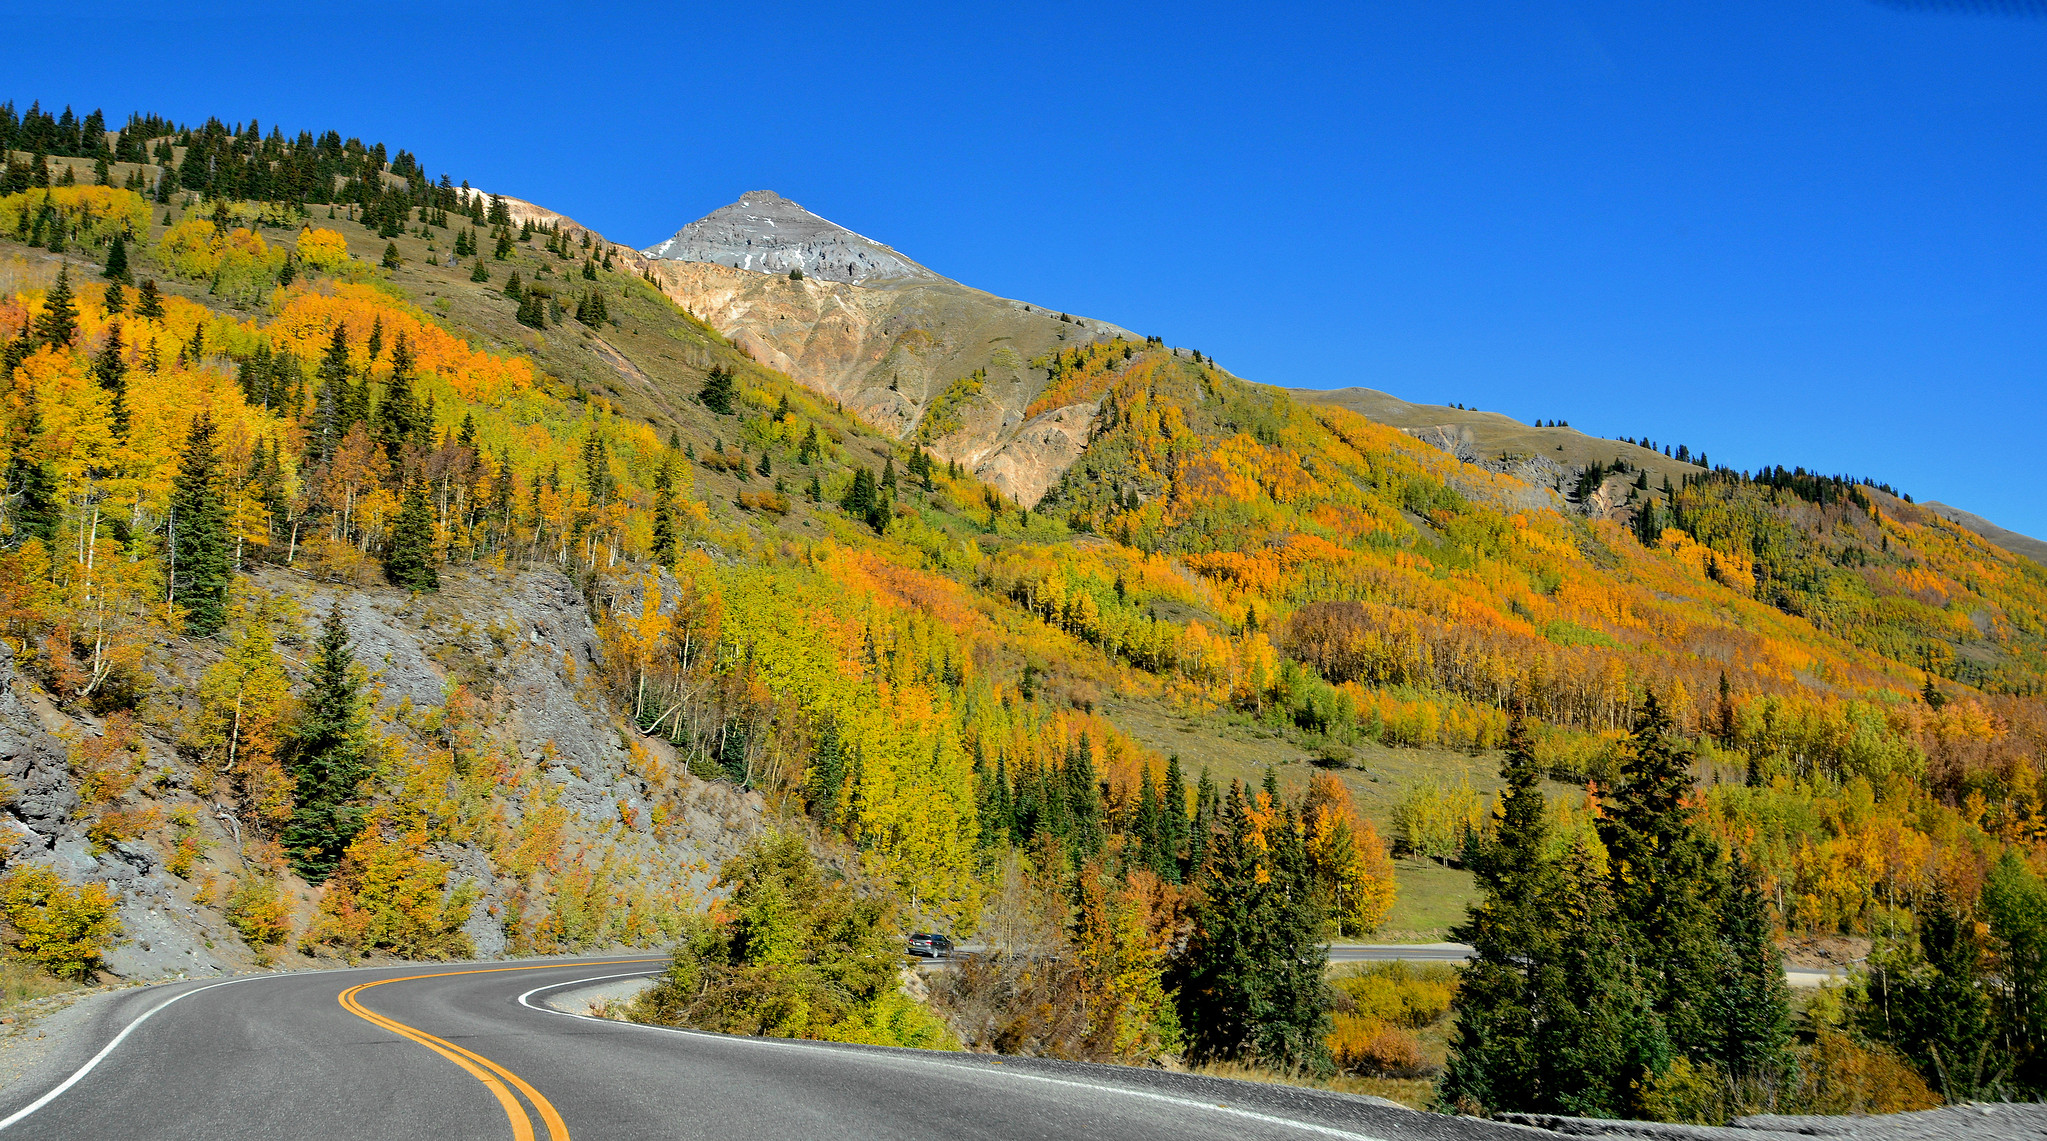 Road traveling through the mountains with trees in an array of fall colors